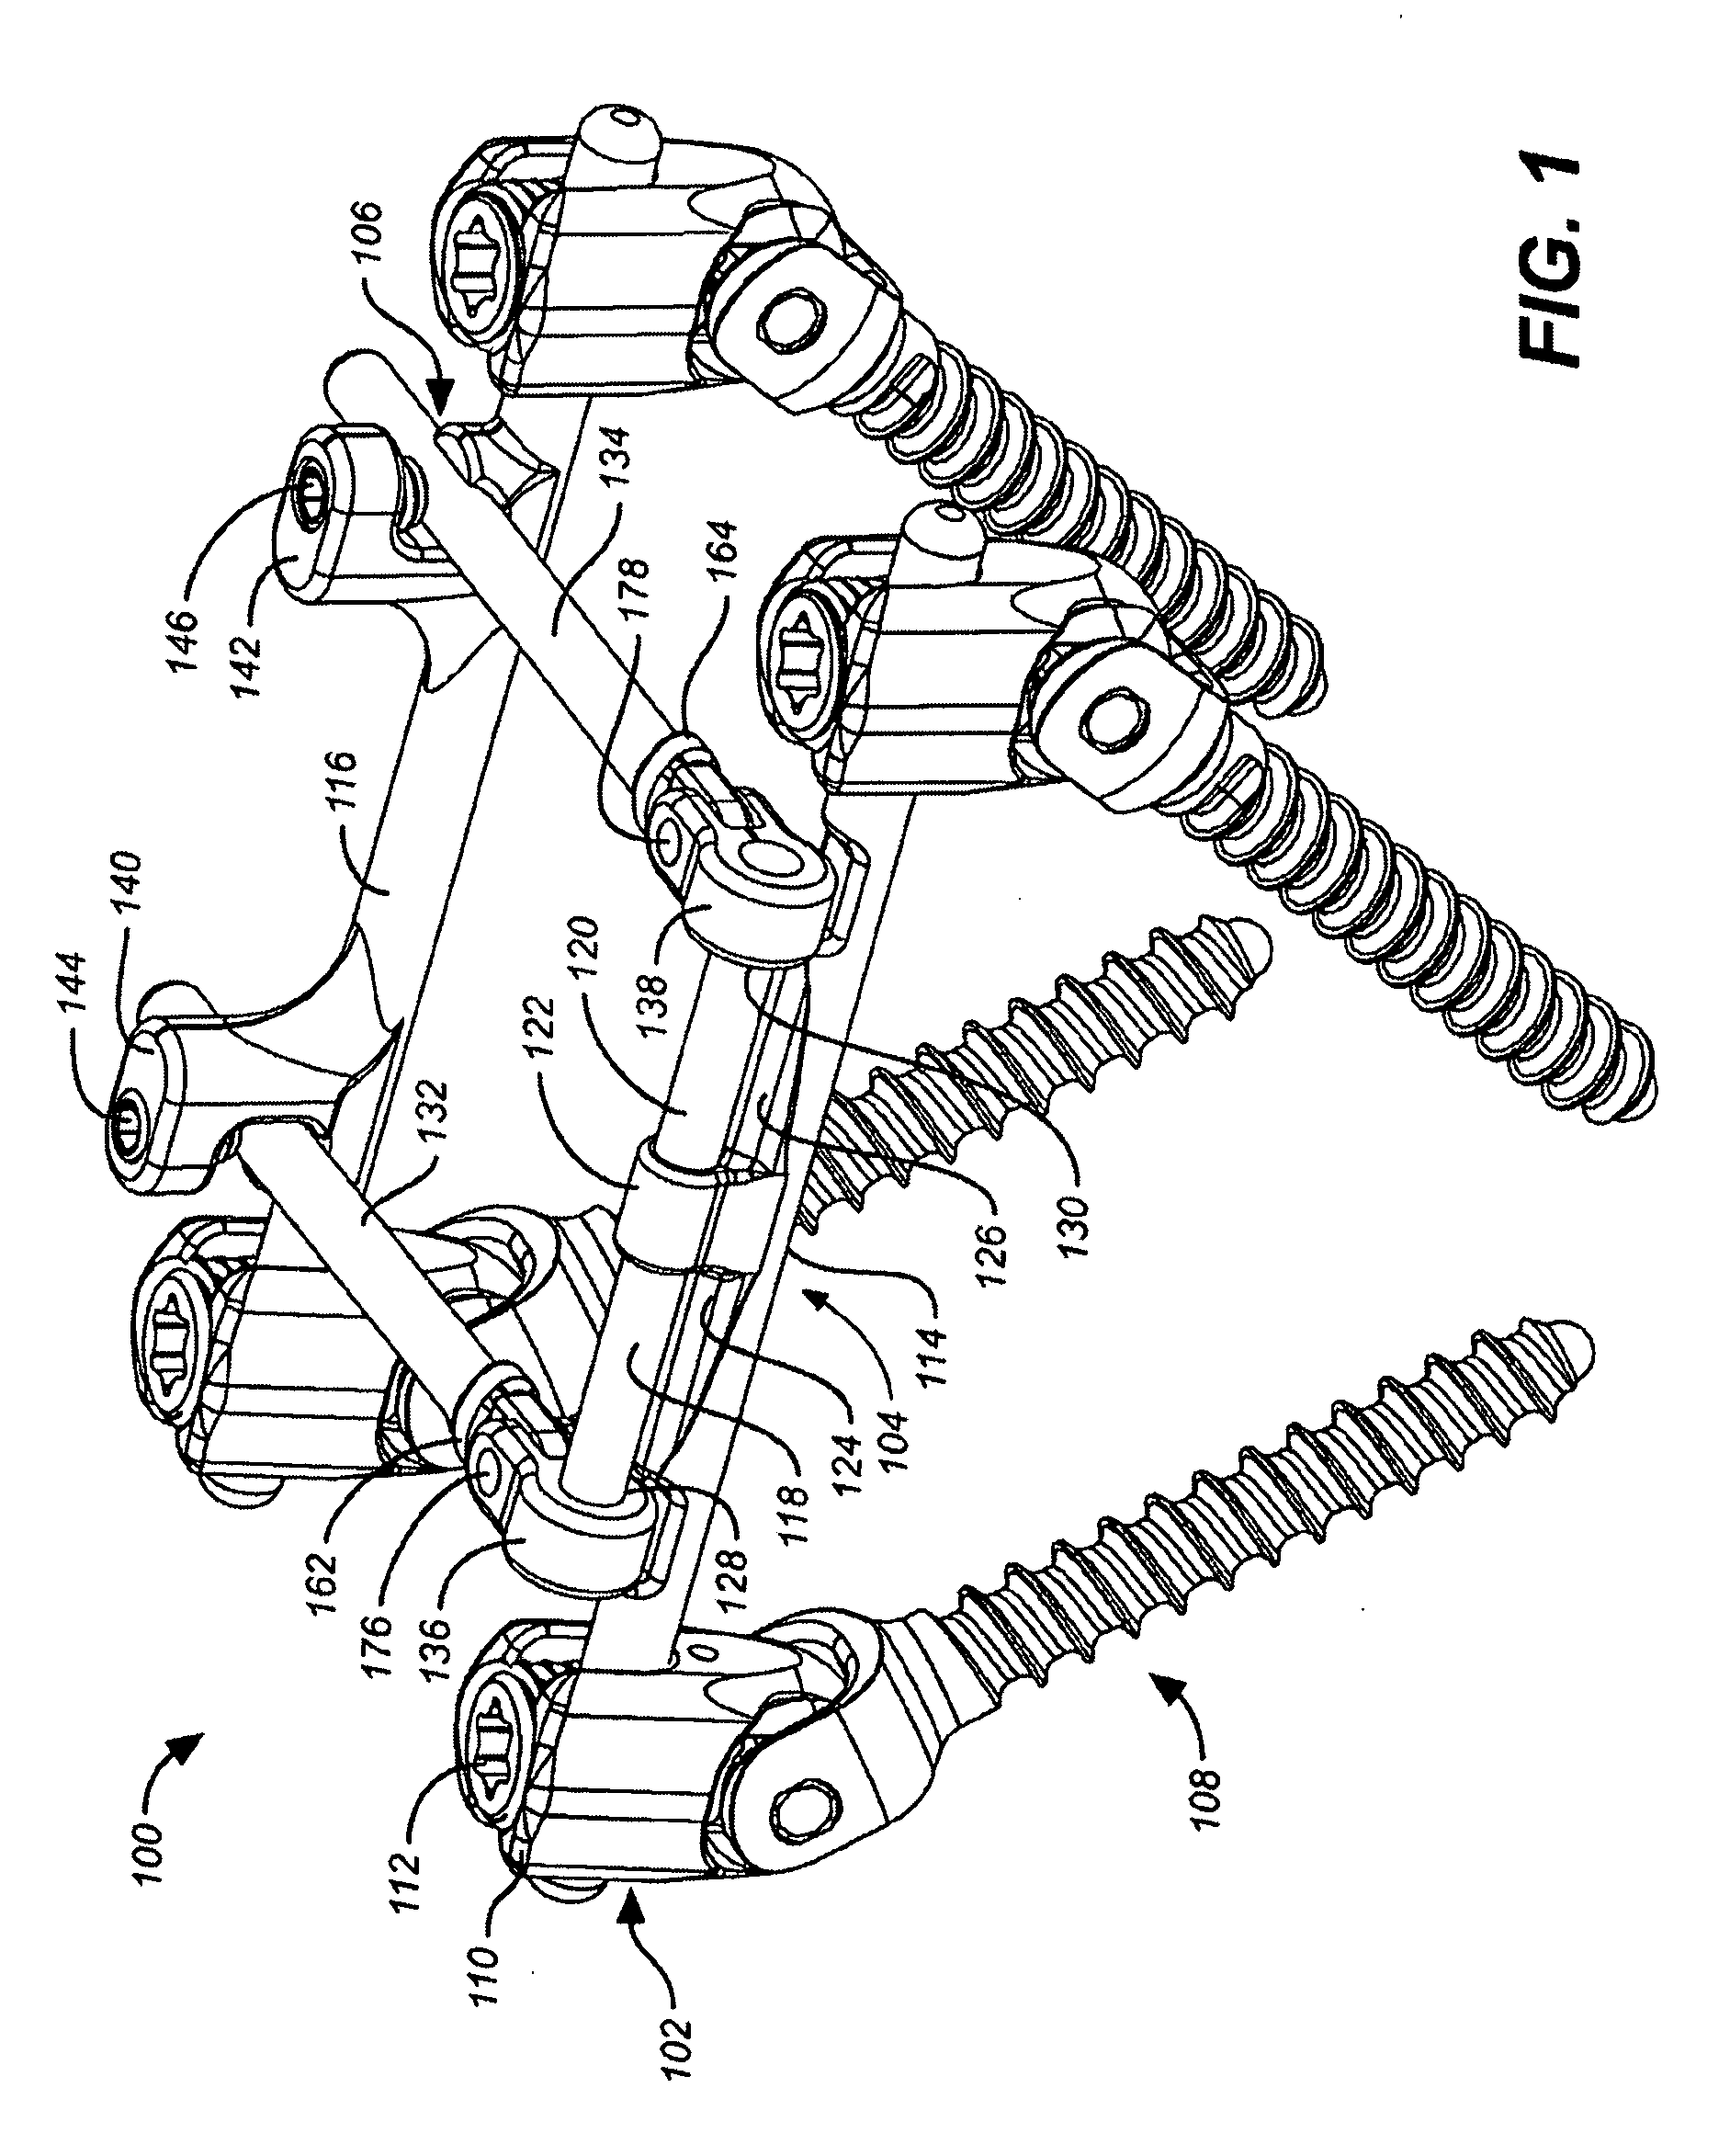 Deflection rod system with a non-linear deflection to load characteristic for a dynamic stabilization and motion preservation spinal implantation system and method